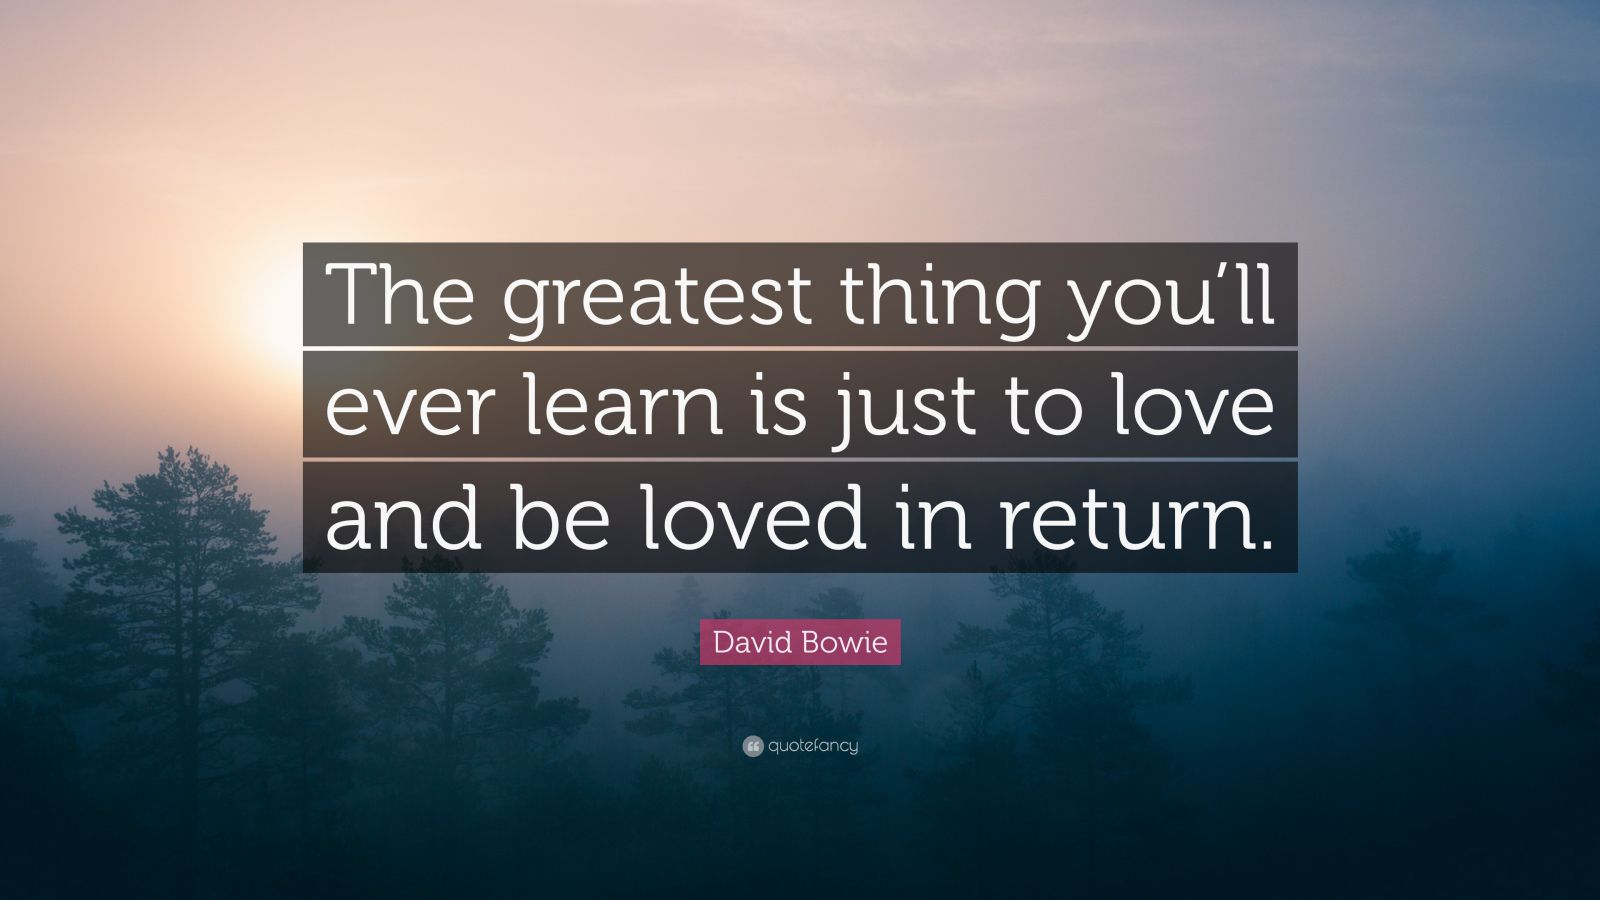 David Bowie Quote: “The greatest thing you’ll ever learn is just to ...